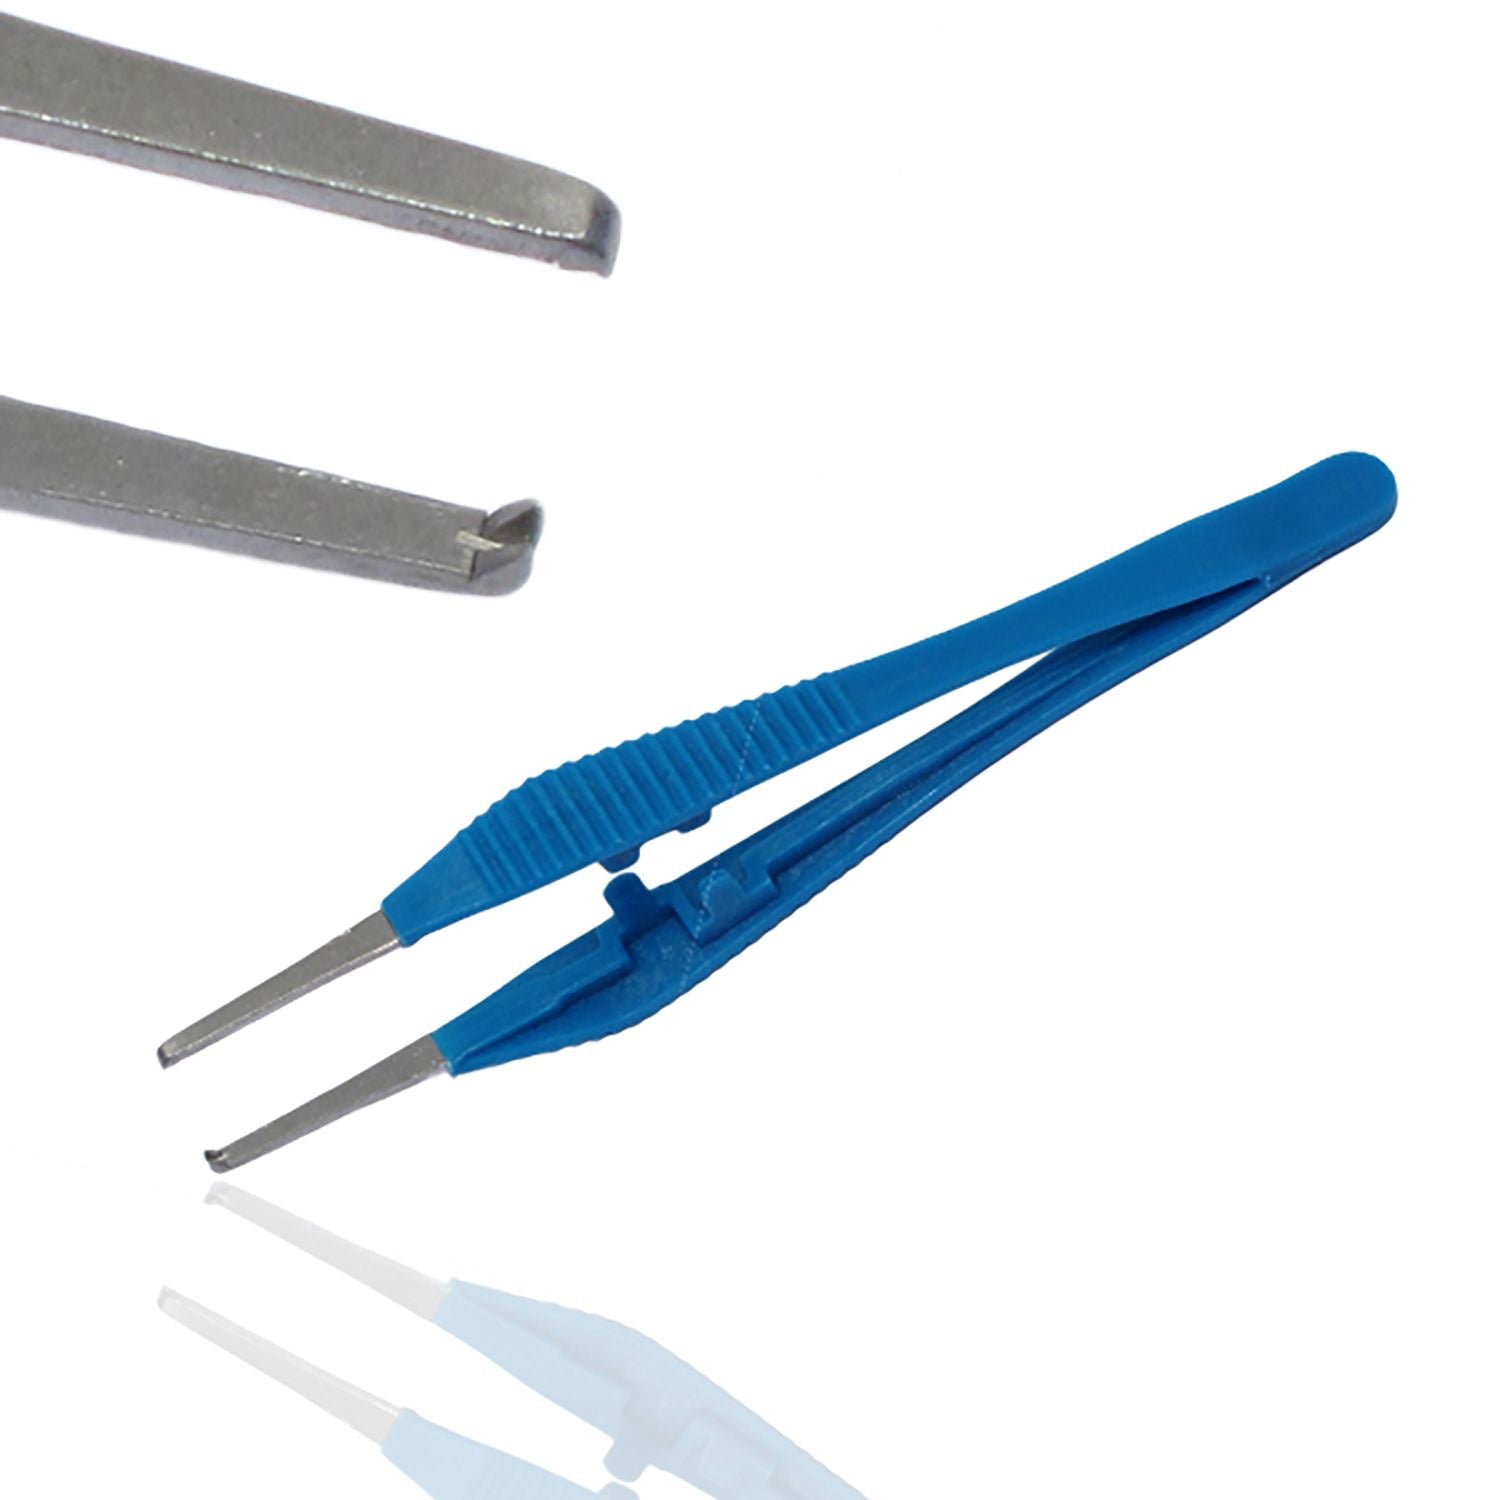 Instramed Iris Toothed Forceps | 10.5cm | Single